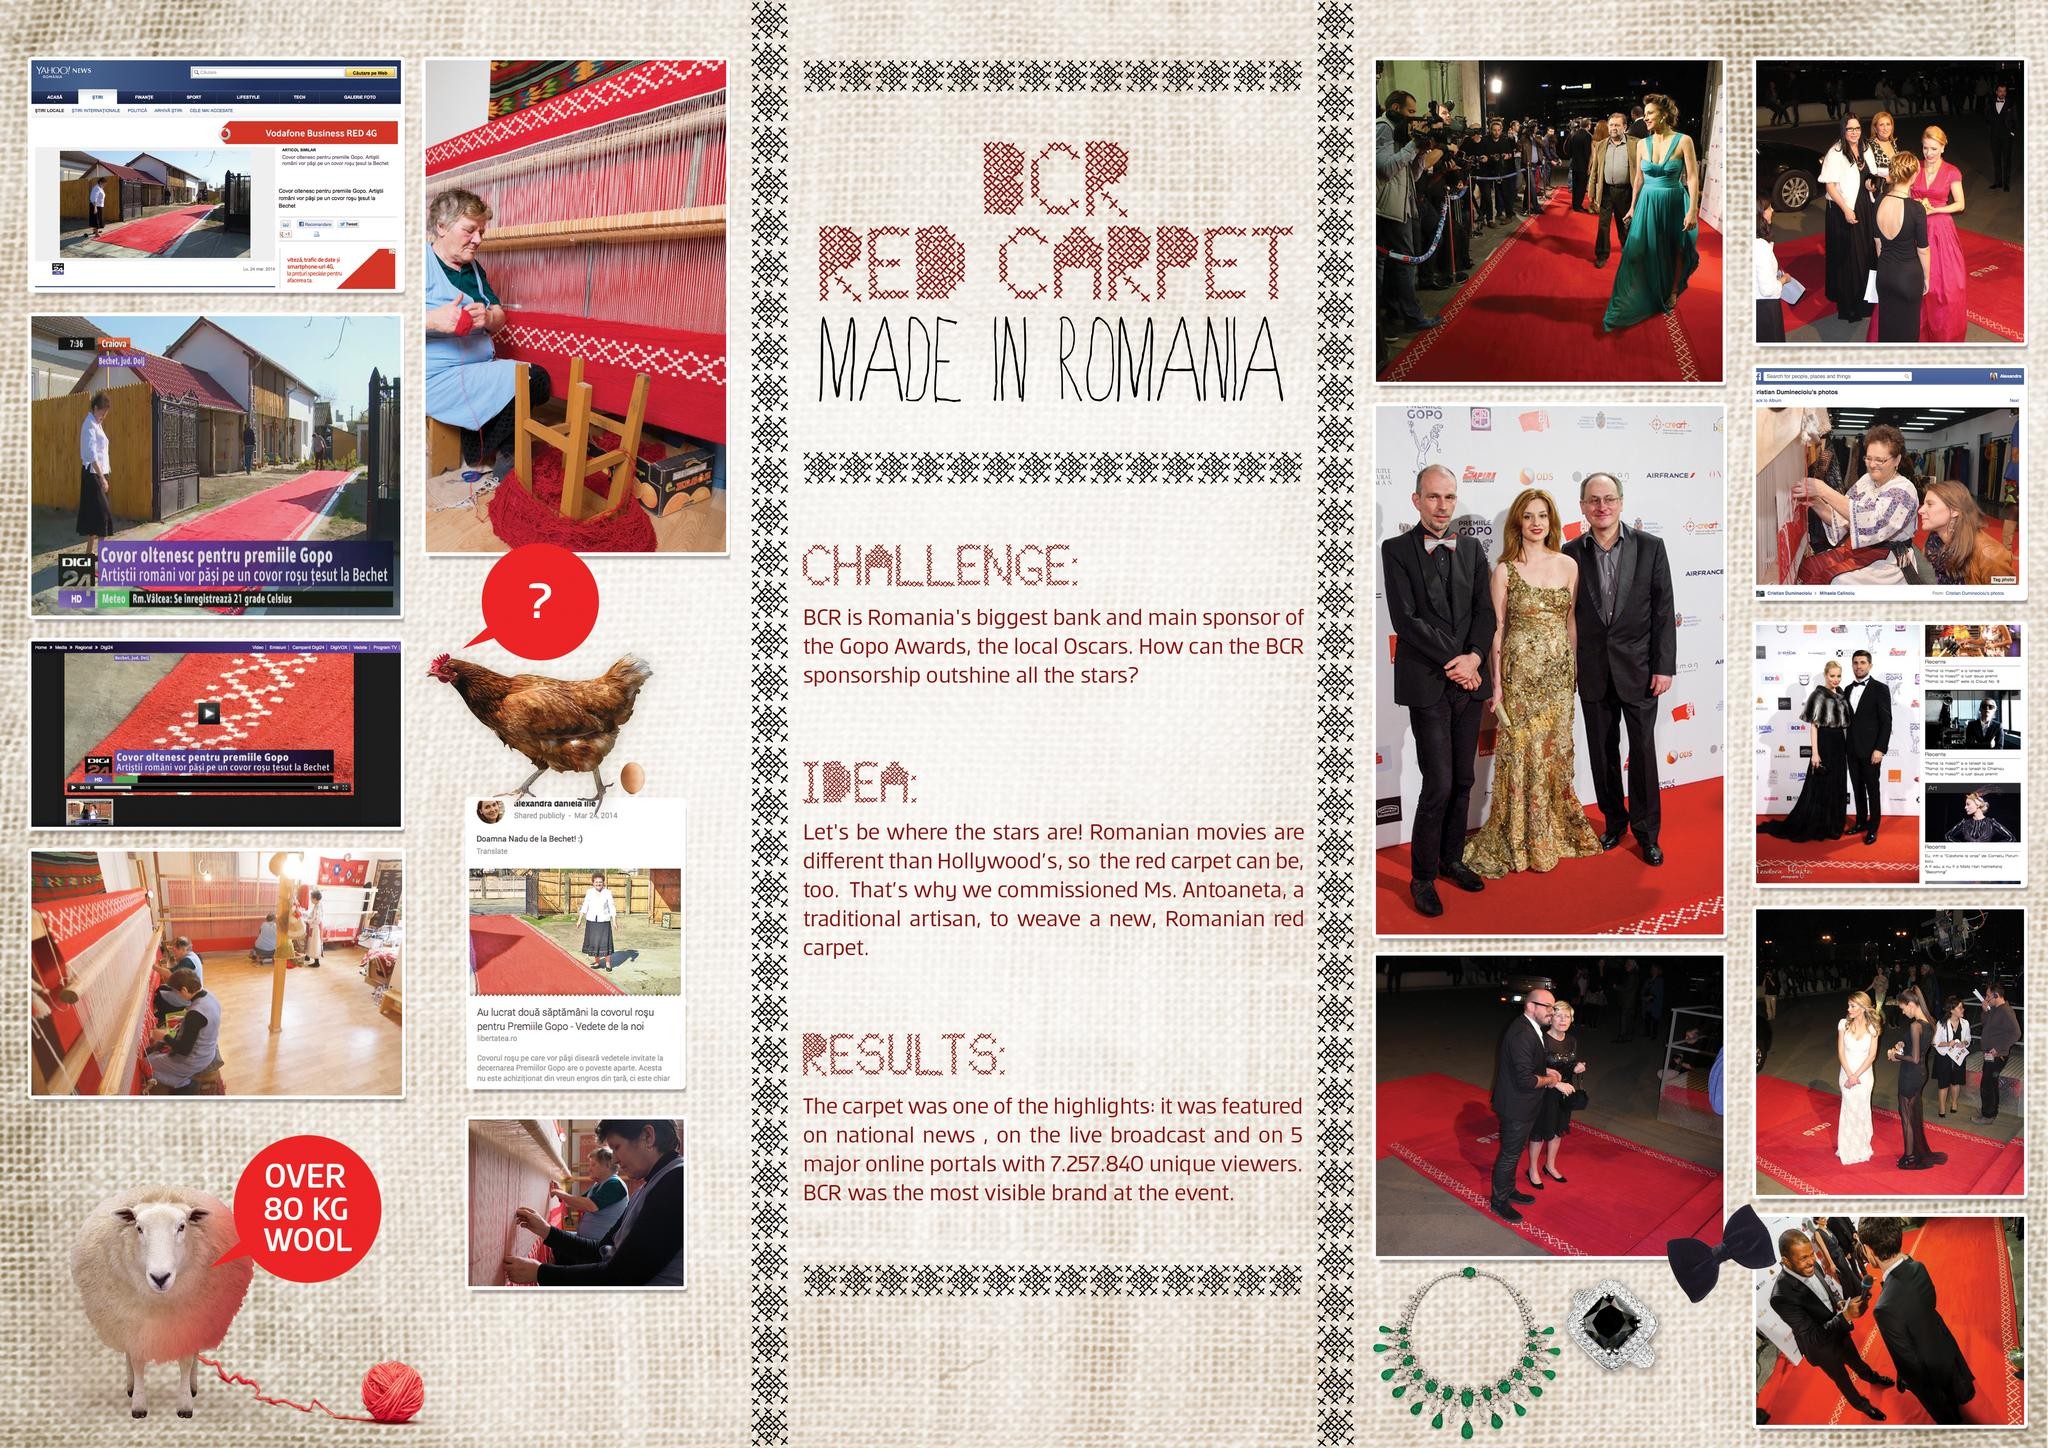 BCR RED CARPET MADE IN ROMANIA